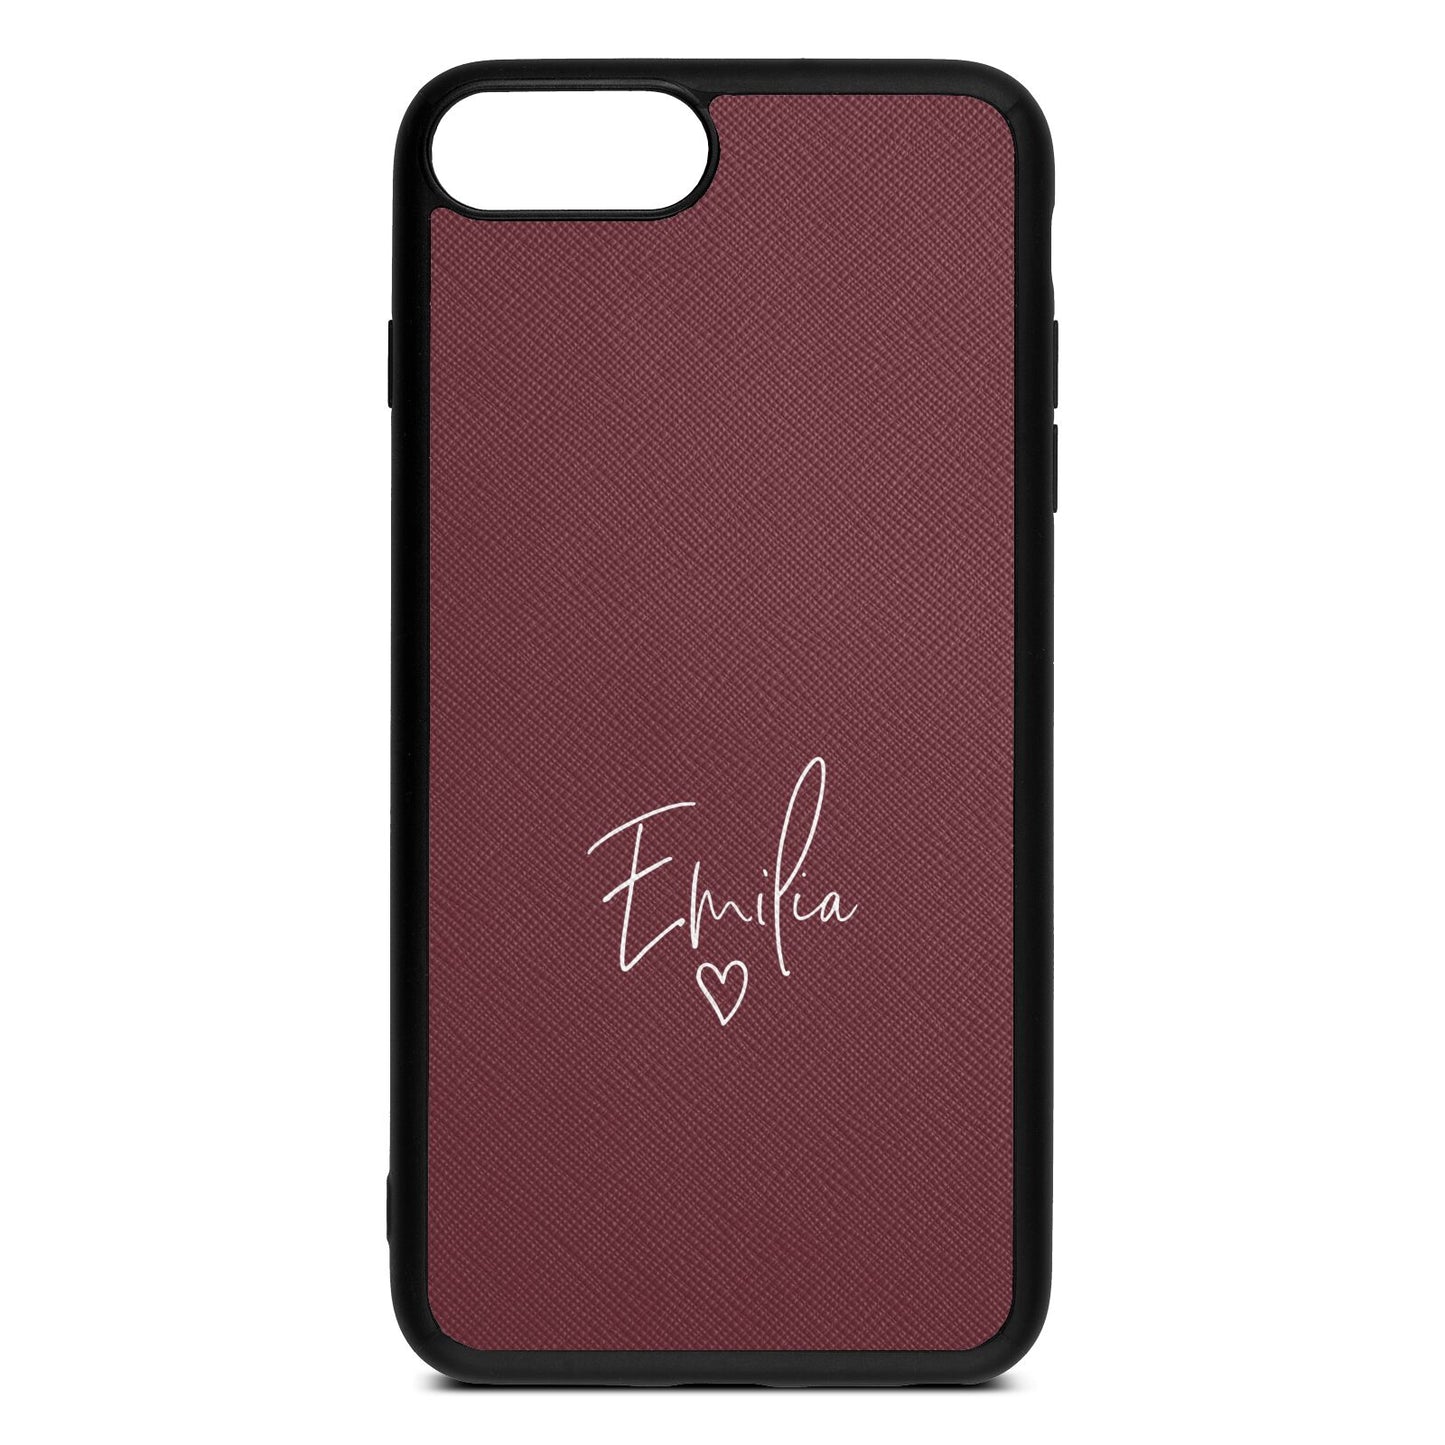 White Handwritten Name Transparent Rose Brown Saffiano Leather iPhone 8 Plus Case